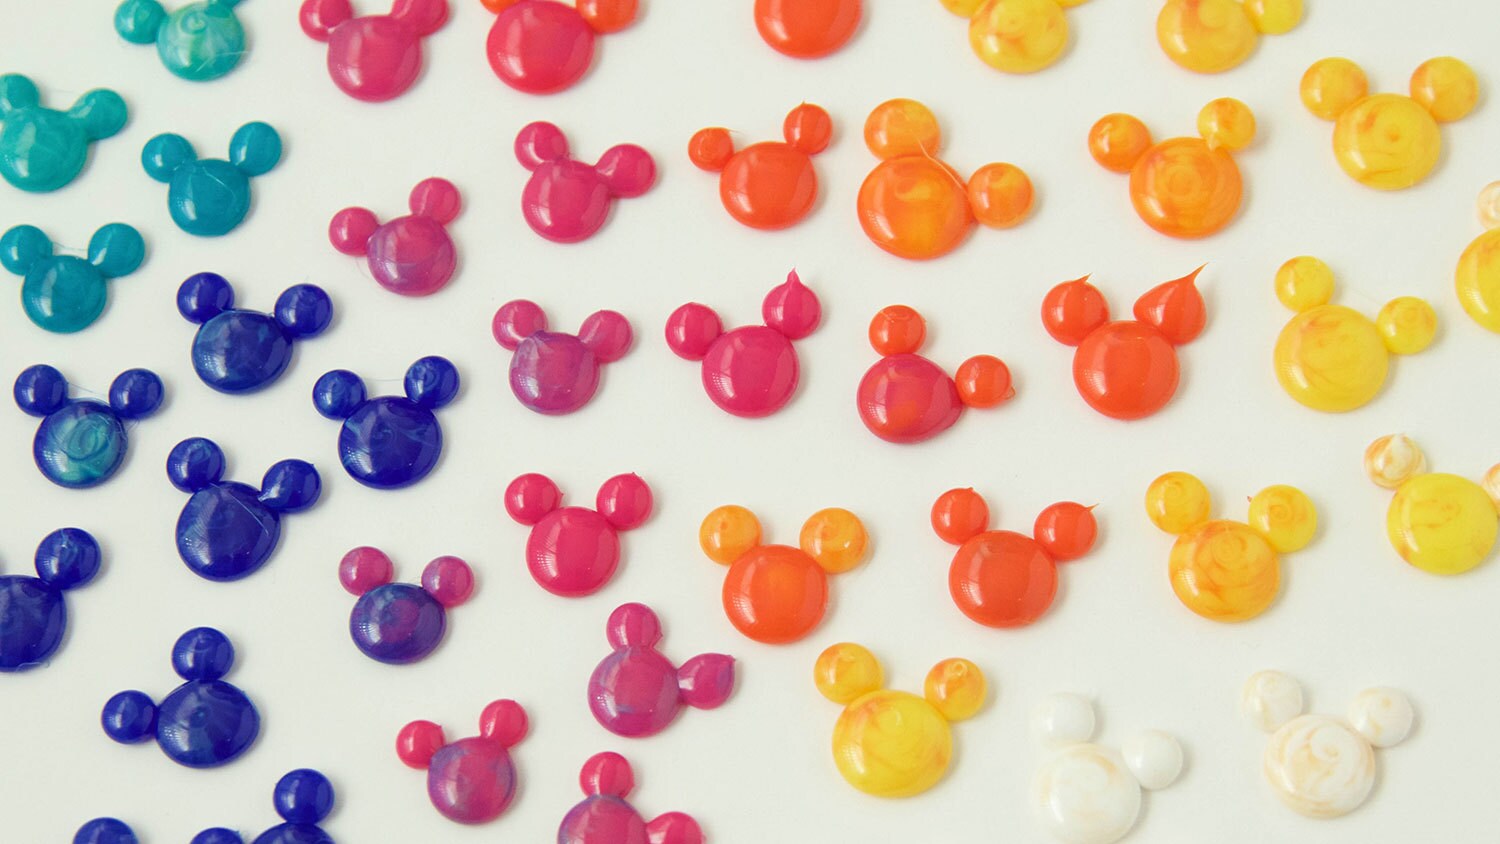 Colorful Mickey Mouse heads made of three dots of hot glue, a large one for the head and two smaller ones for the ears.